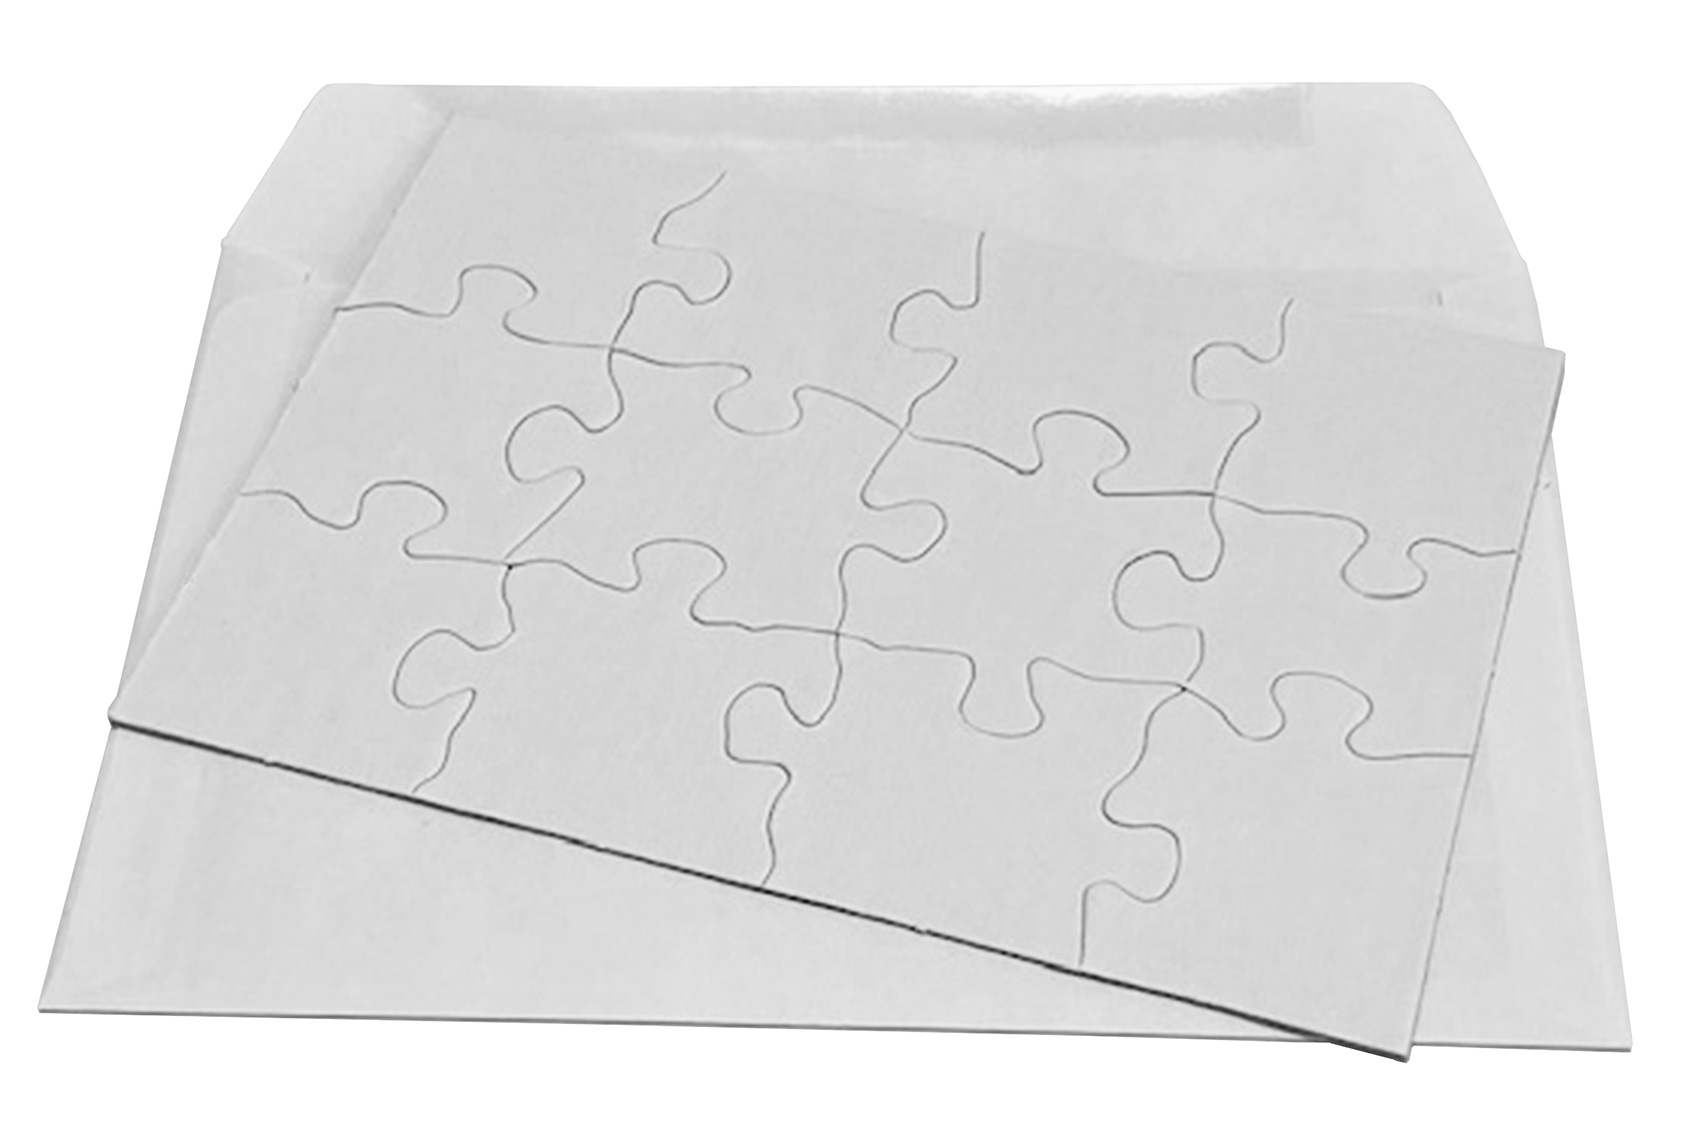 Inovart 2702 5.5 x 8 in. Puzzle-It Blank Puzzles - 12 Piece - 24 Per Pack